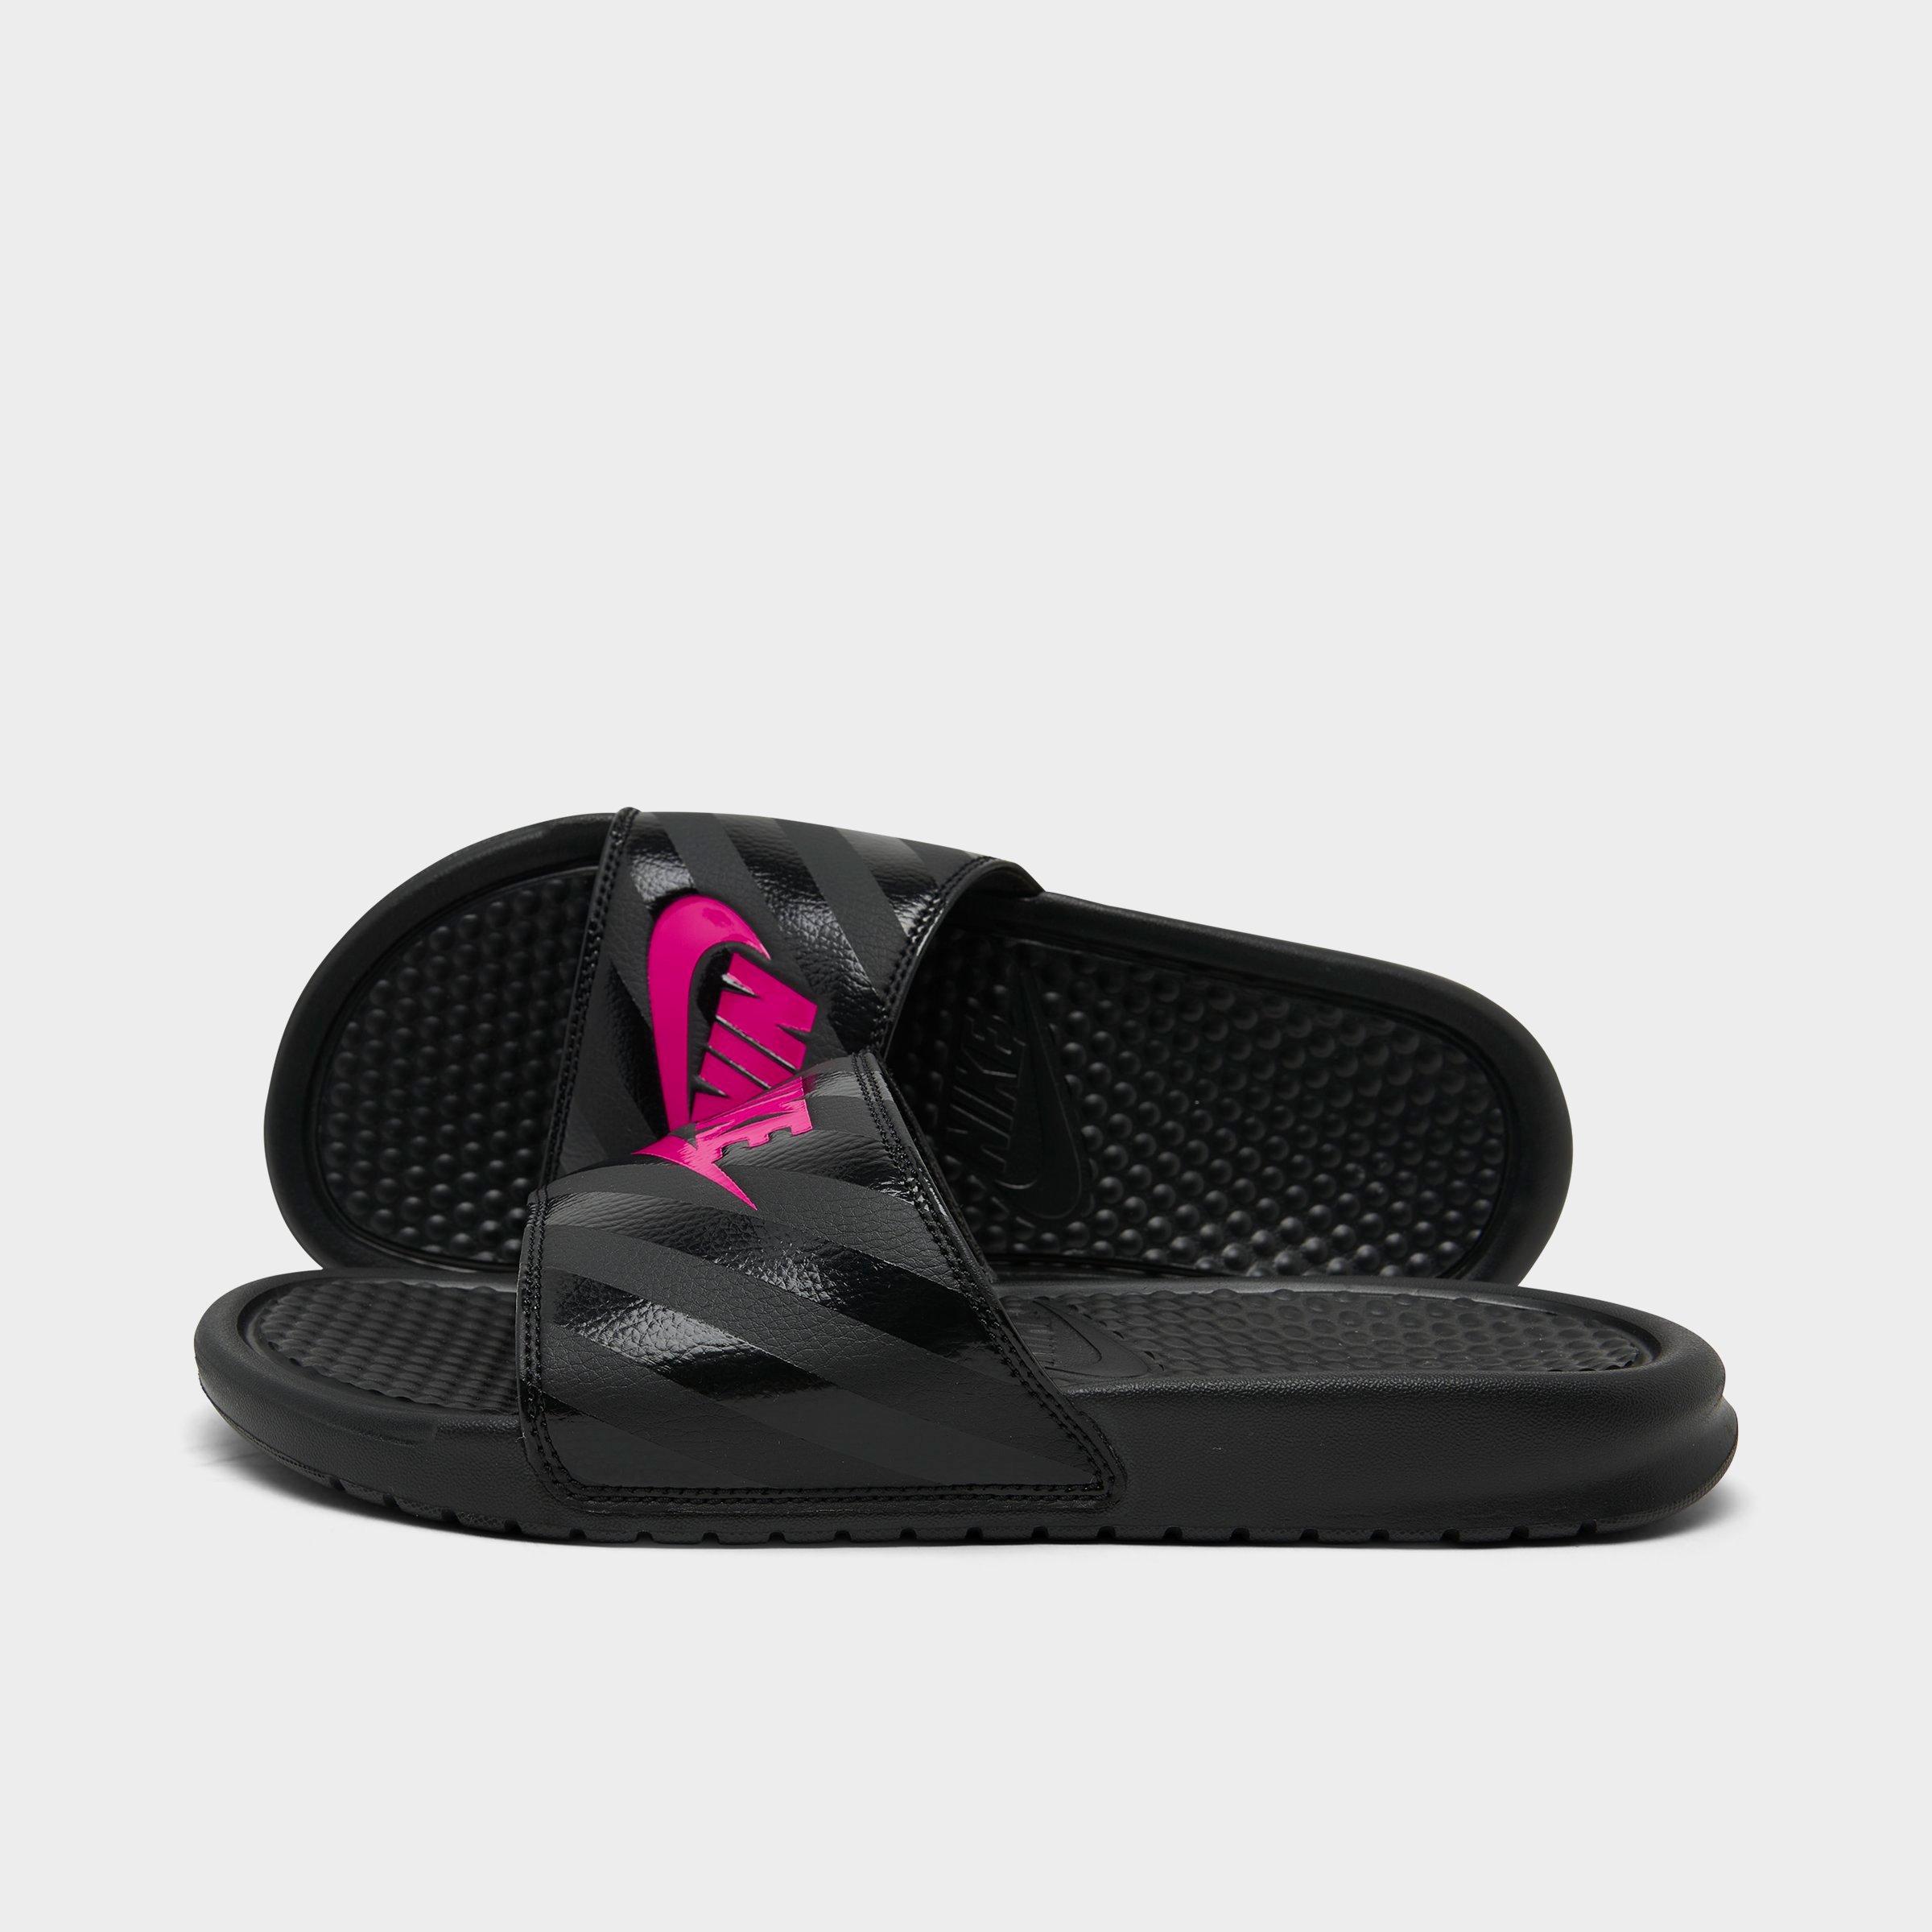 pink nike sandals with straps